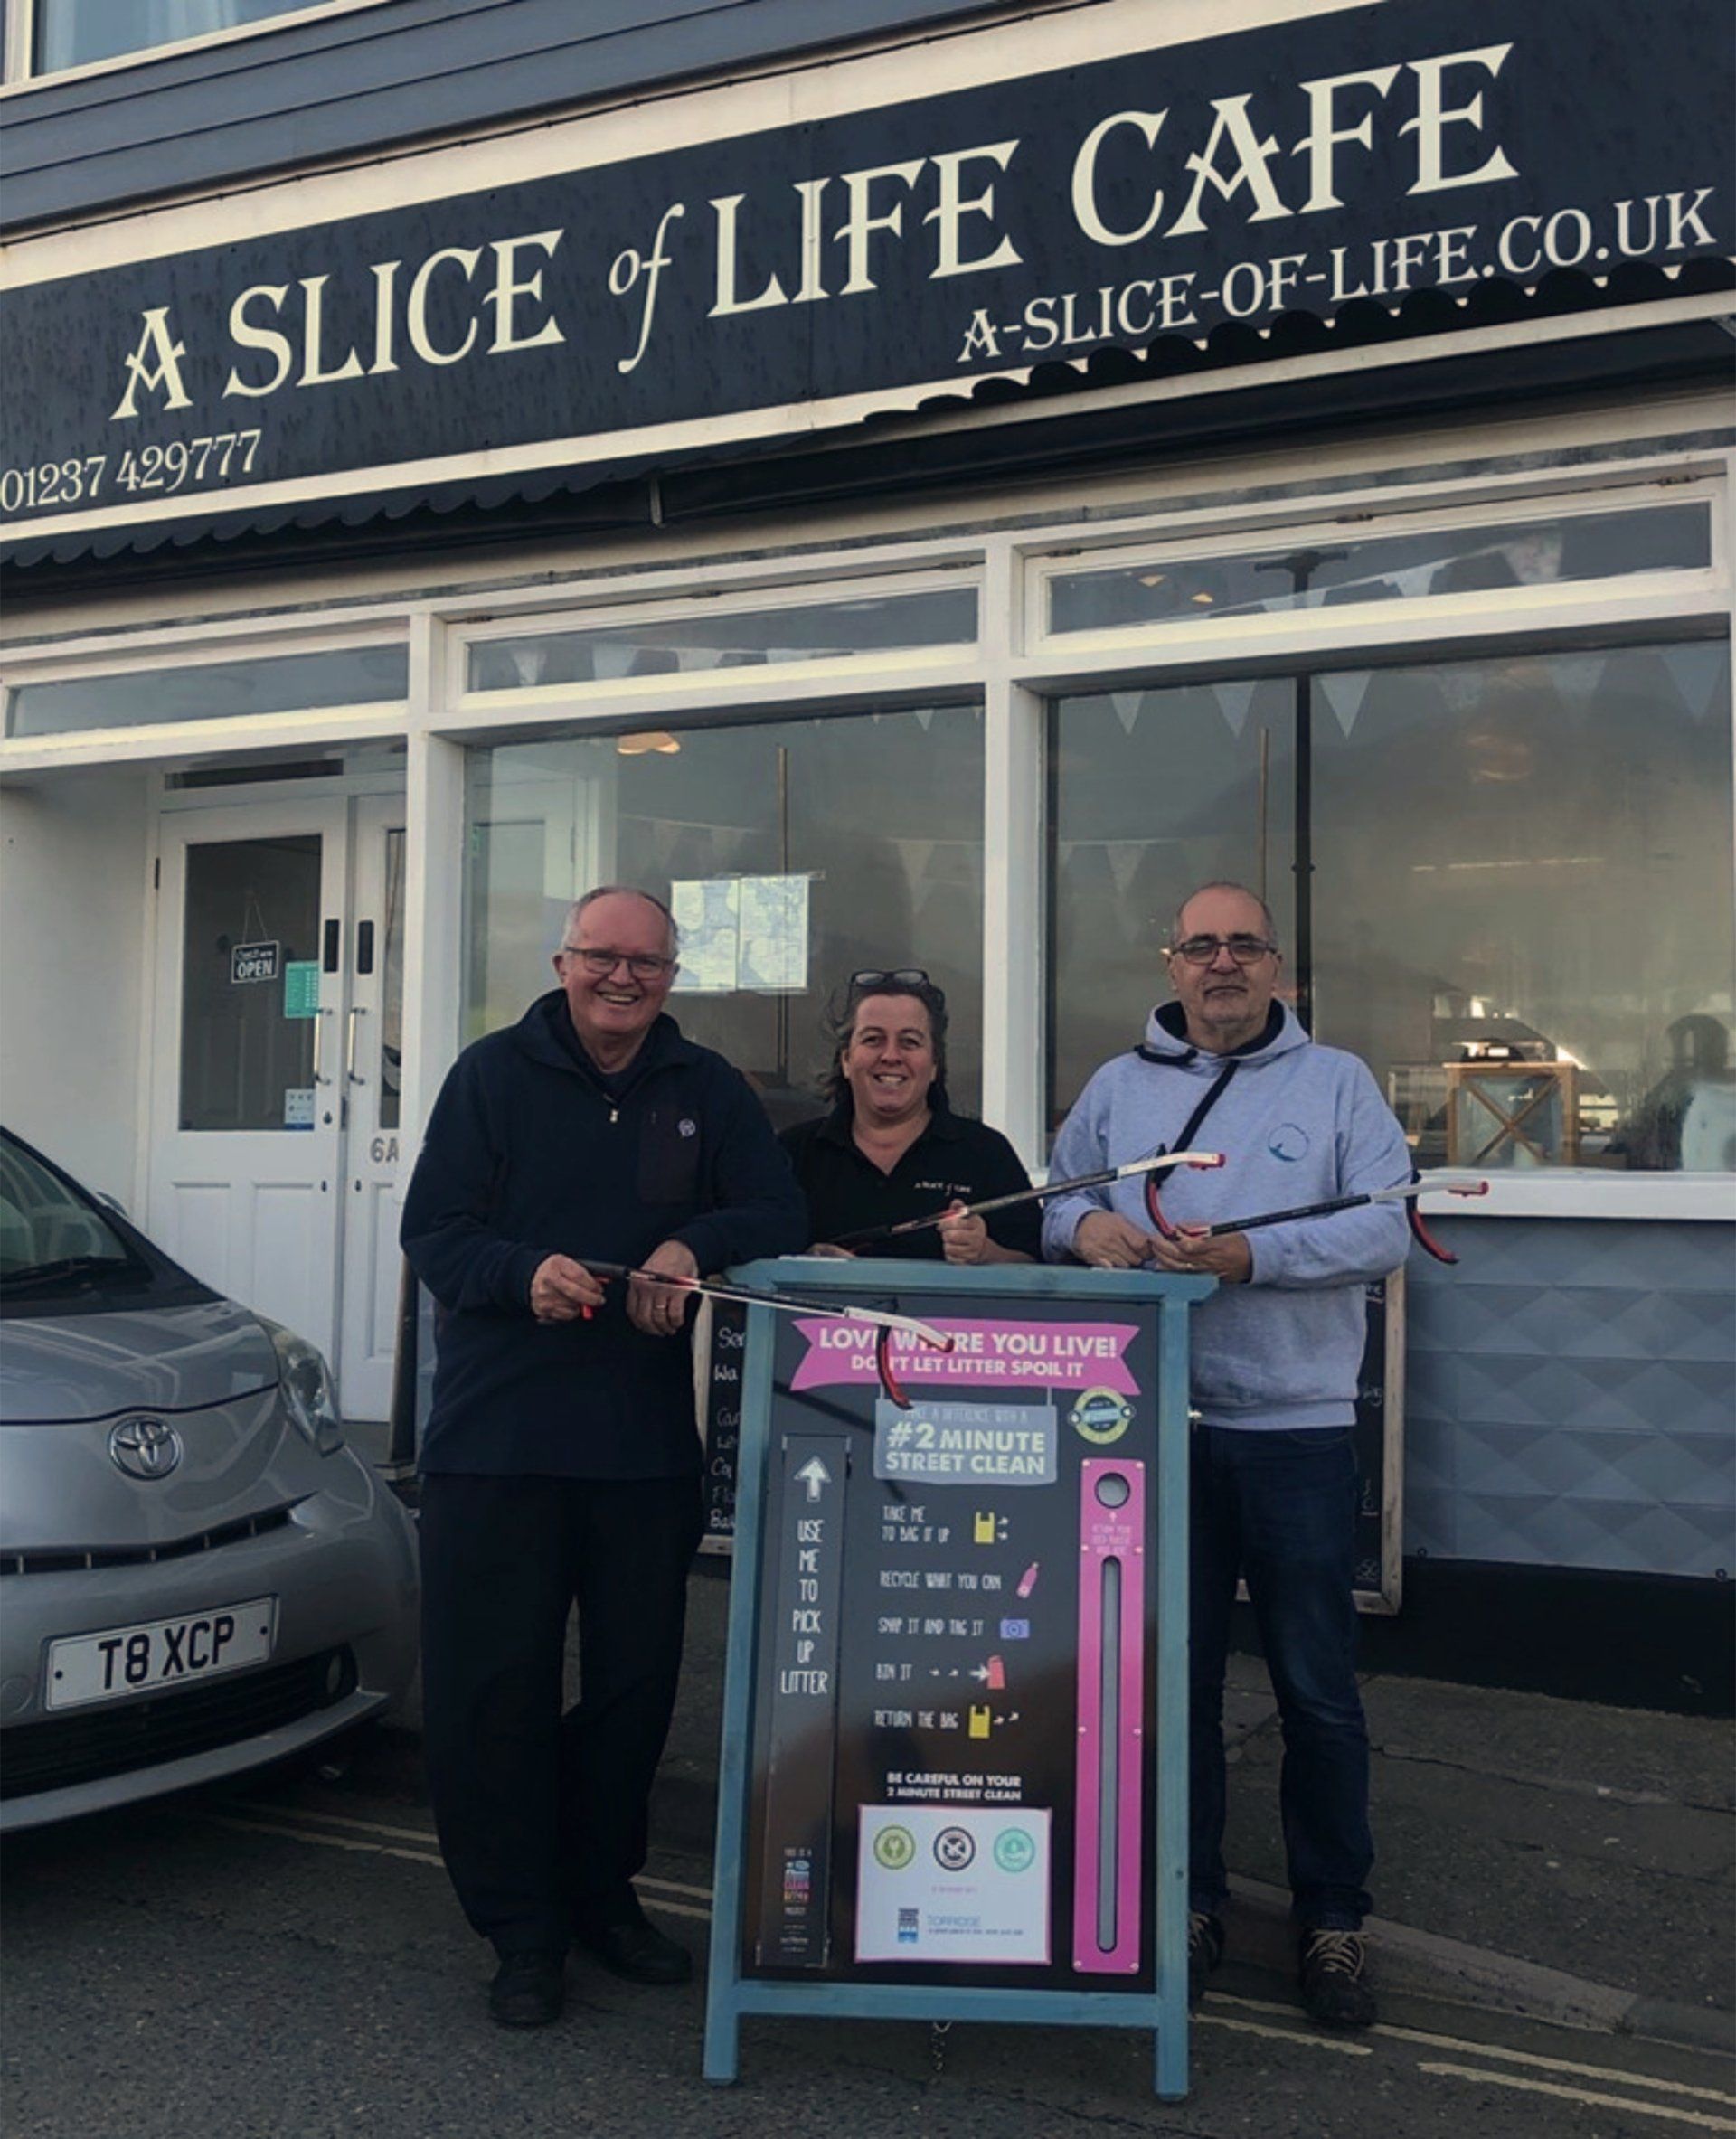 Slice of life cafe in westward ho! have a 2 minute beach cleaning board for anyone to use